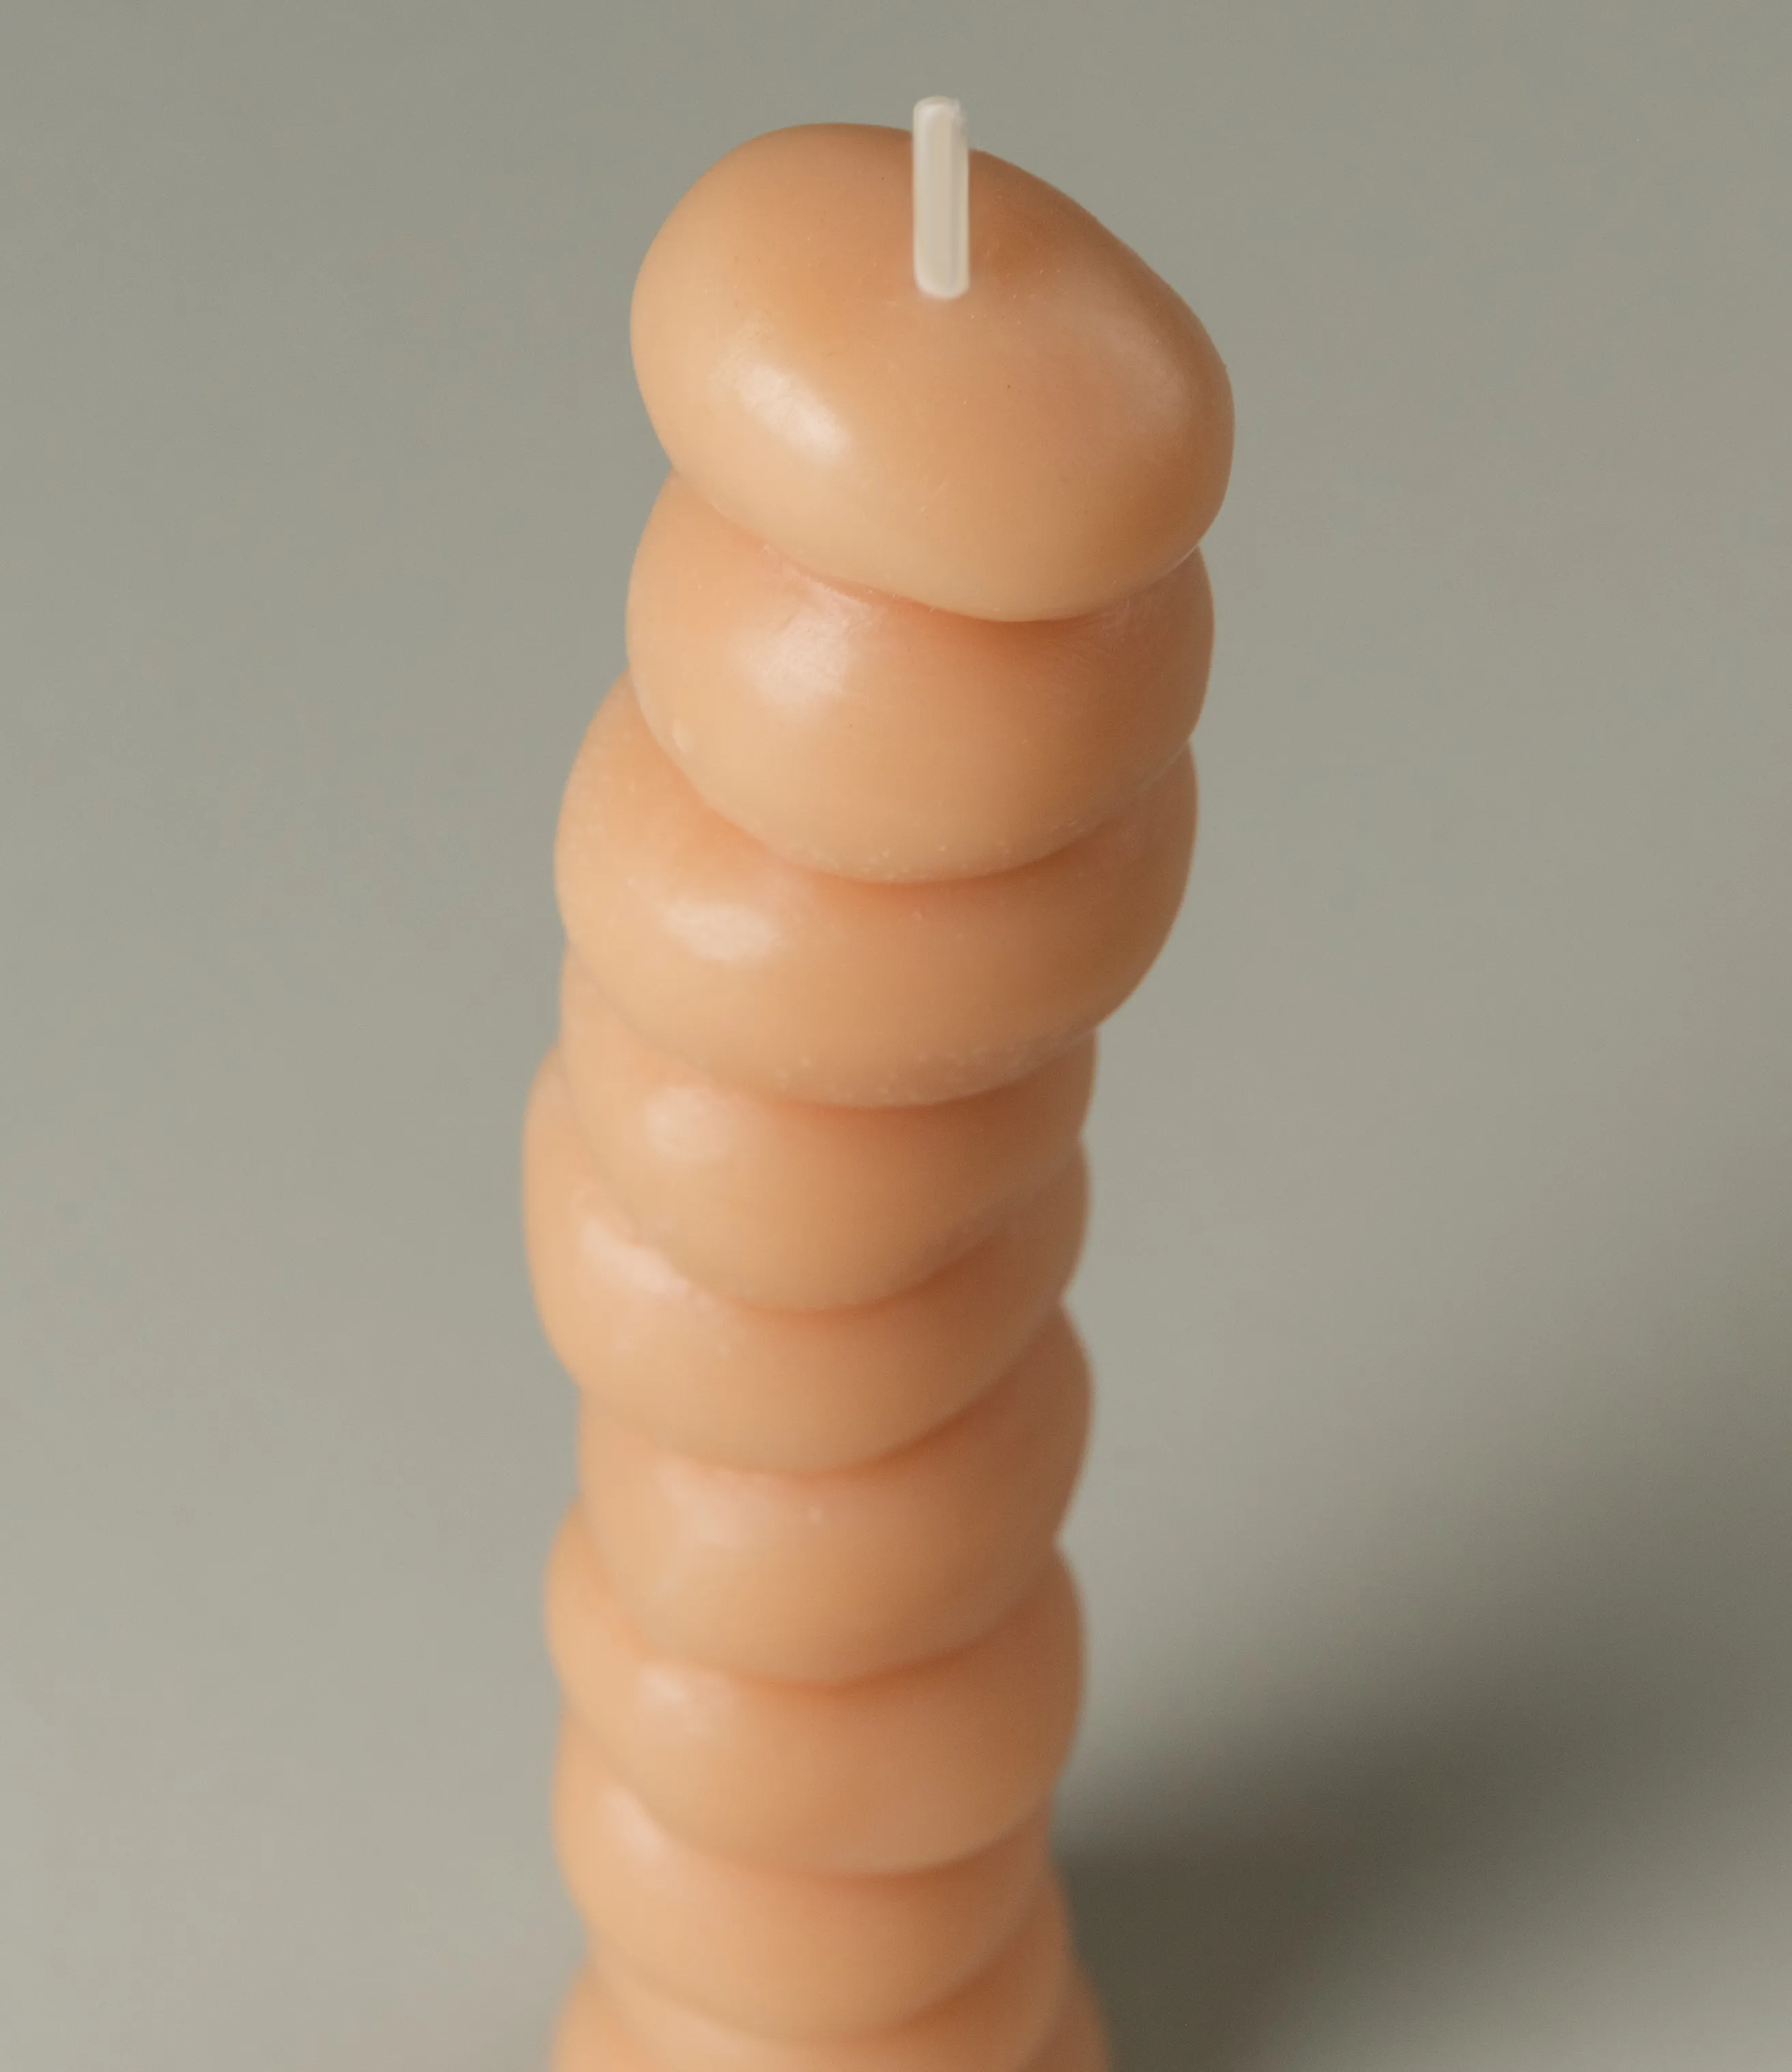 Grape Candle from Ann Vincent has the shape of grapes stacked on top of each other. It has a light nude color.